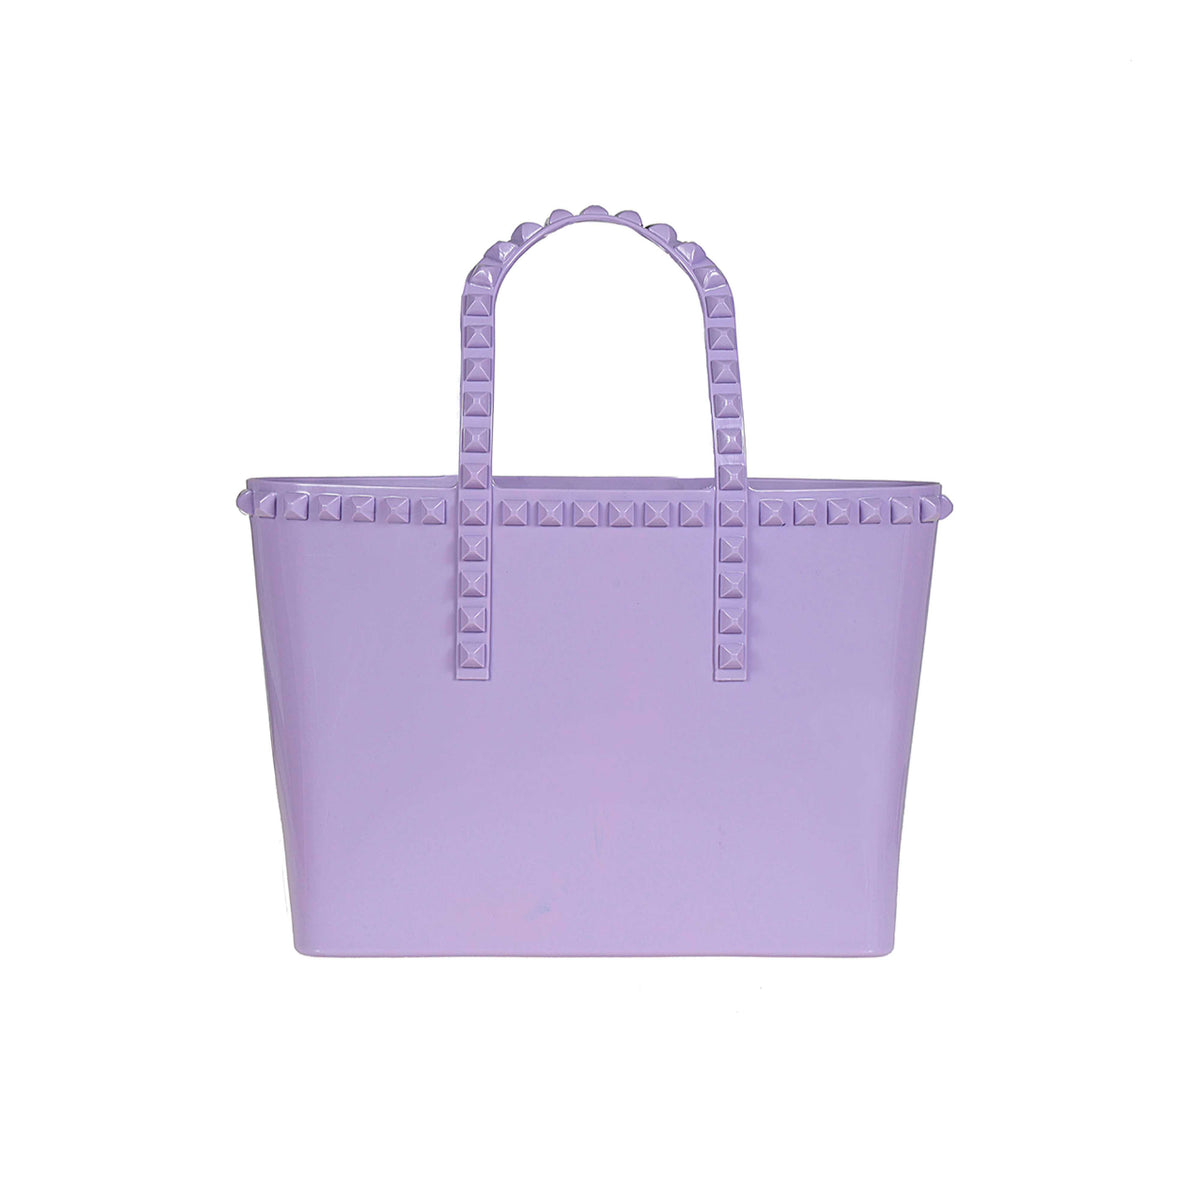 Made in Italy jelly purse in color violet